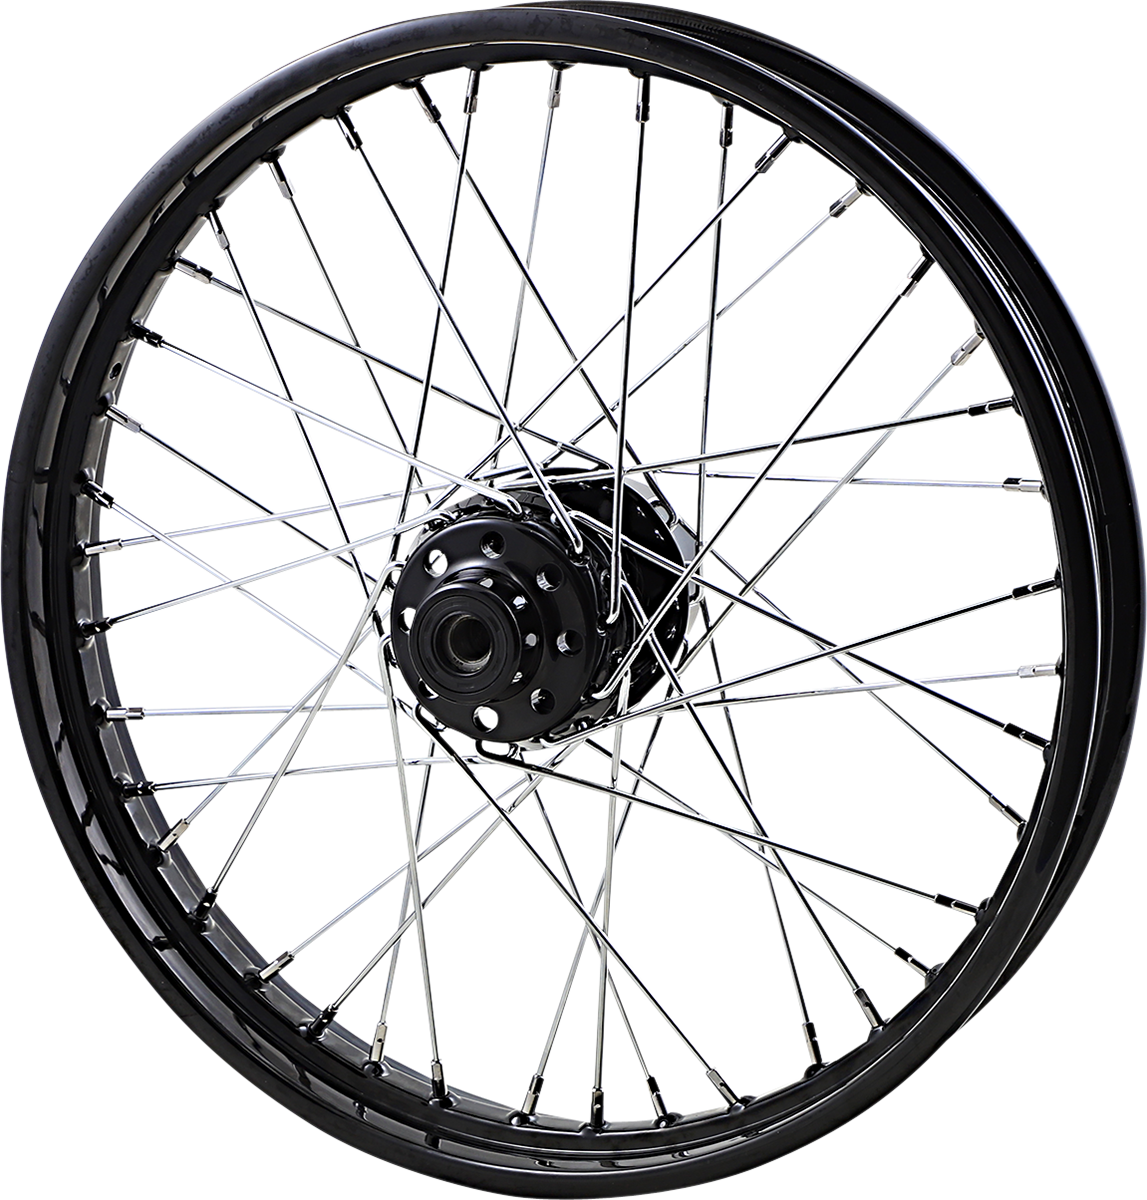 Drag Specialties 21" Laced Motorcycle Front Wheel 1999 Harley Dyna Wide Glide